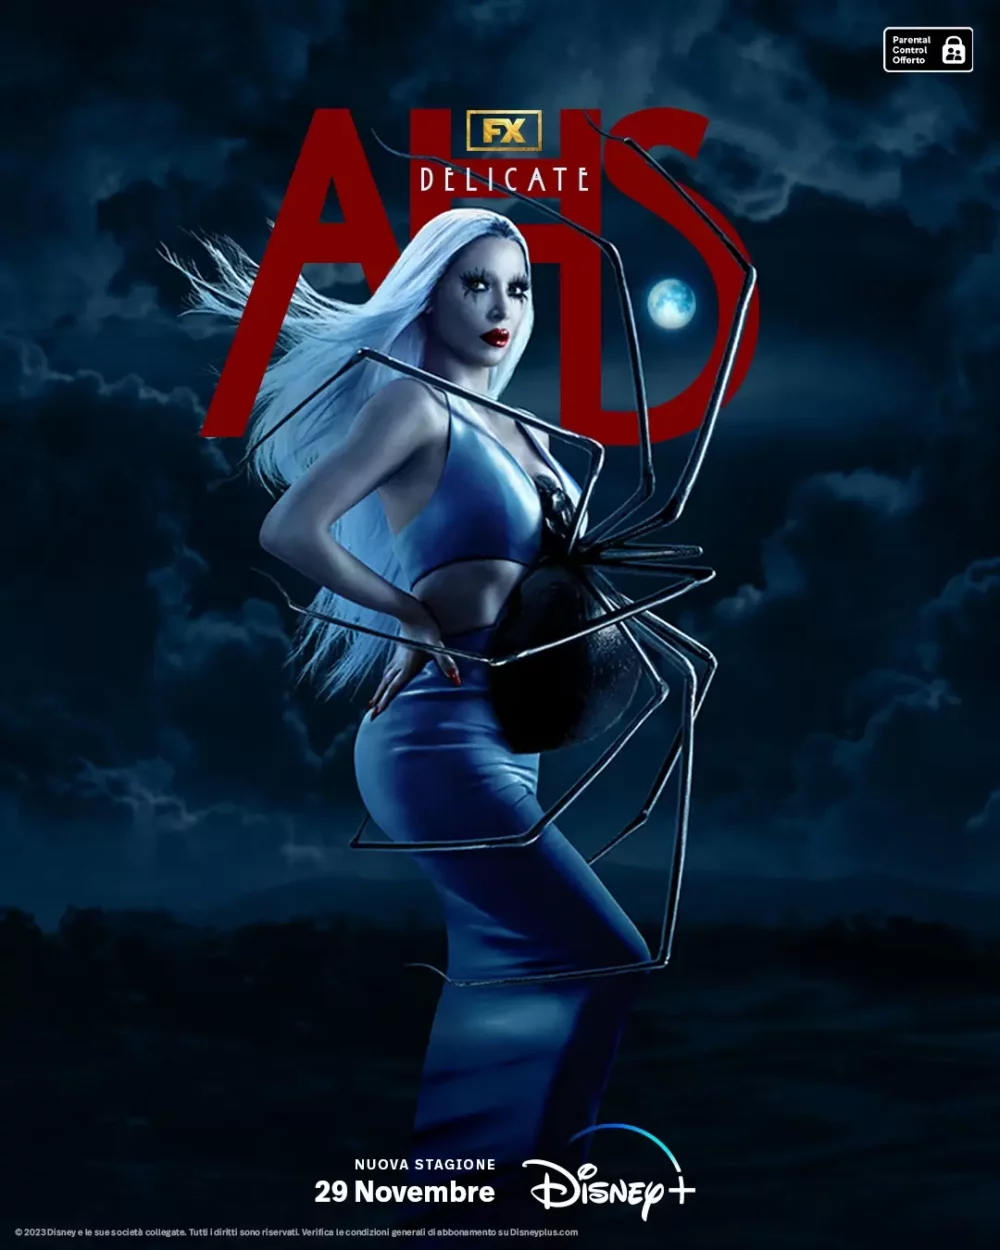 American horror story delicate, poster